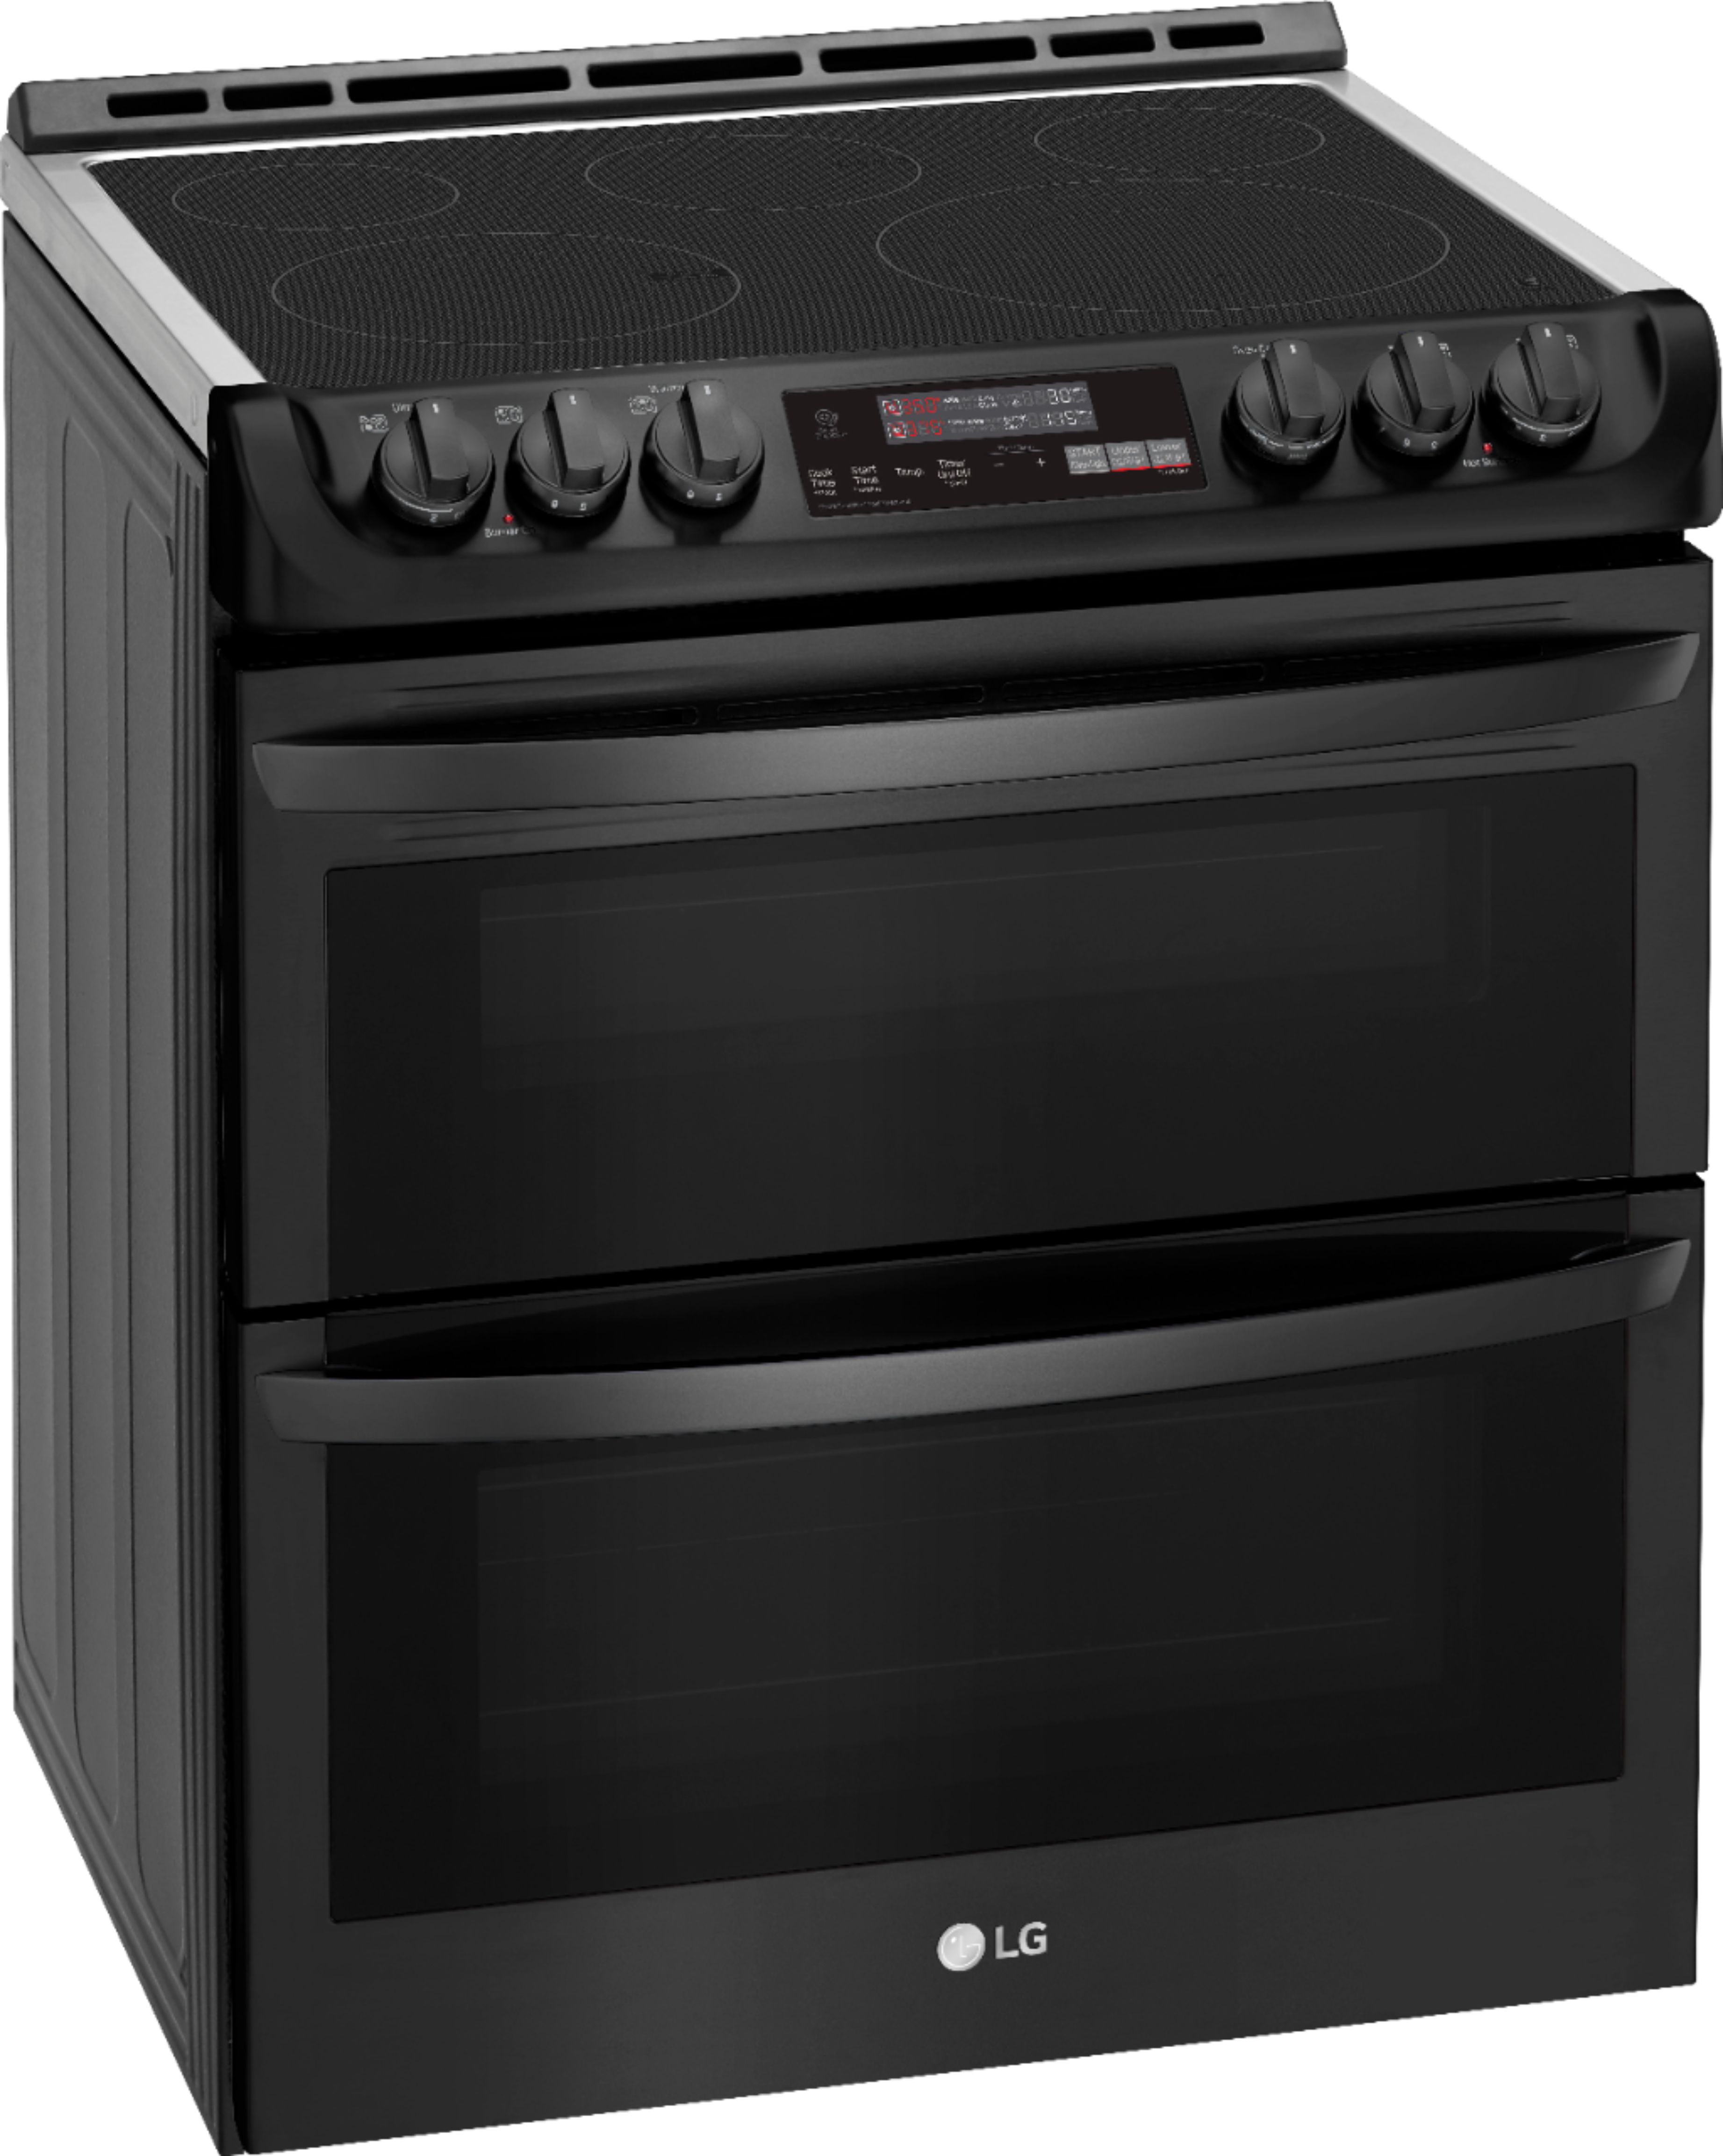 Angle View: KitchenAid - 6.4 Cu. Ft. Self-Cleaning Freestanding Electric Convection Range - Stainless steel